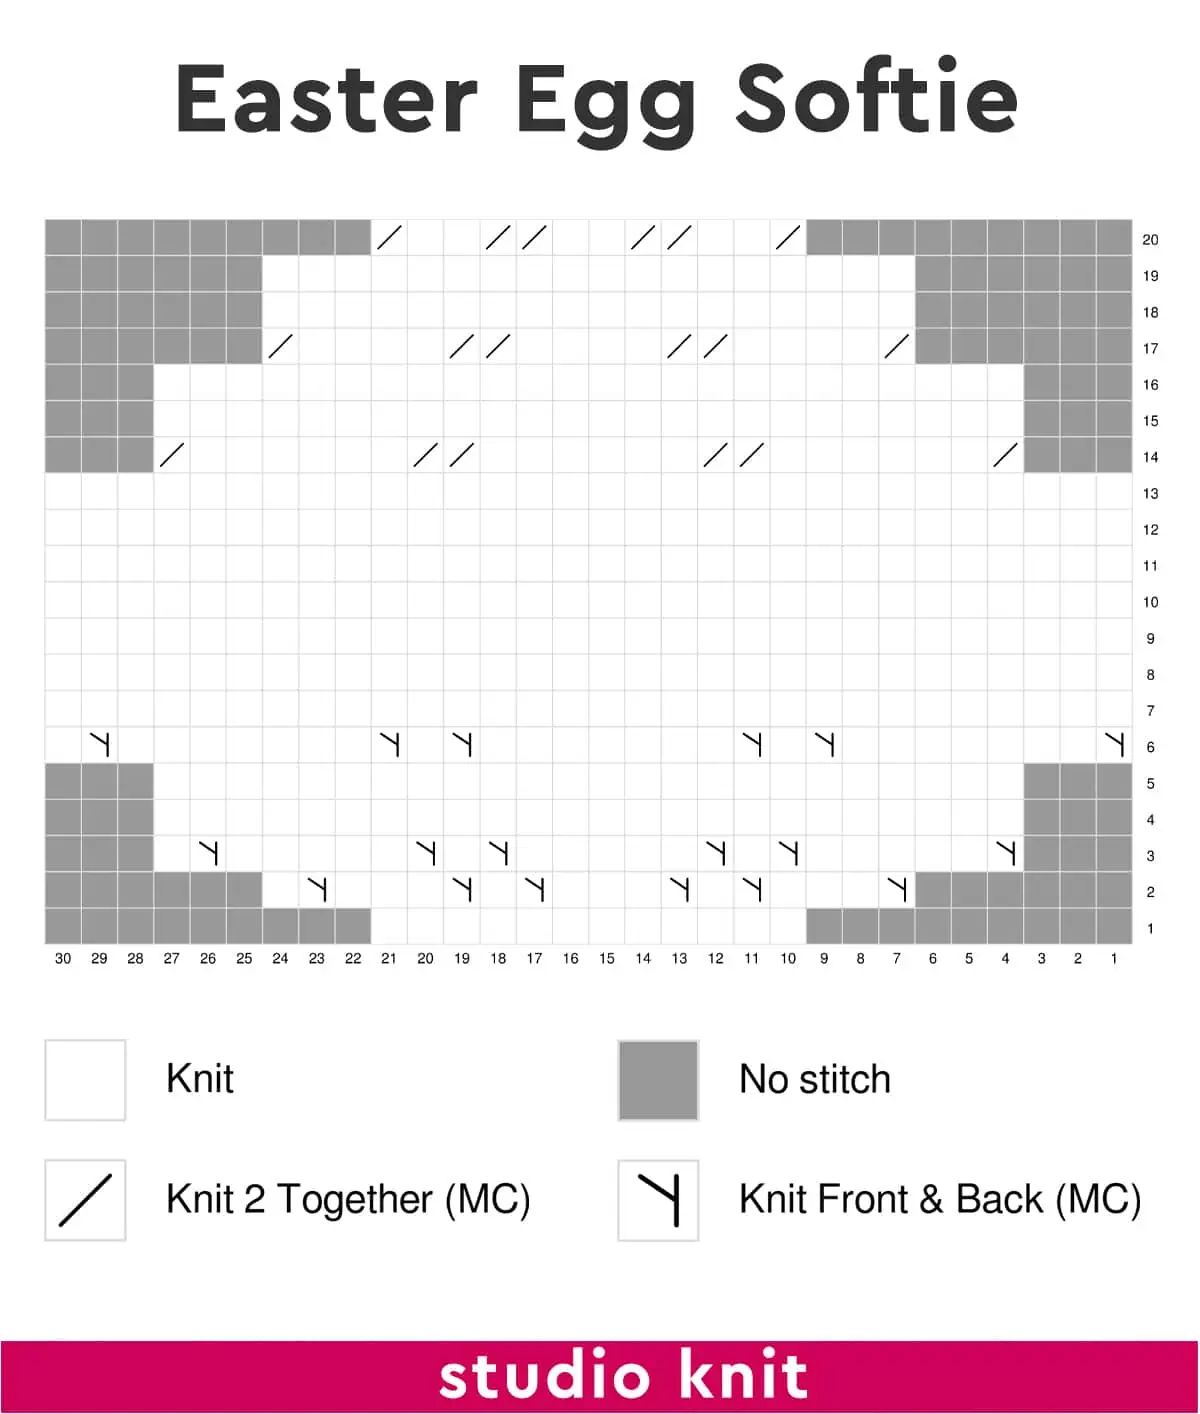 Knitting chart of the Easter Egg Softie design by Studio Knit.